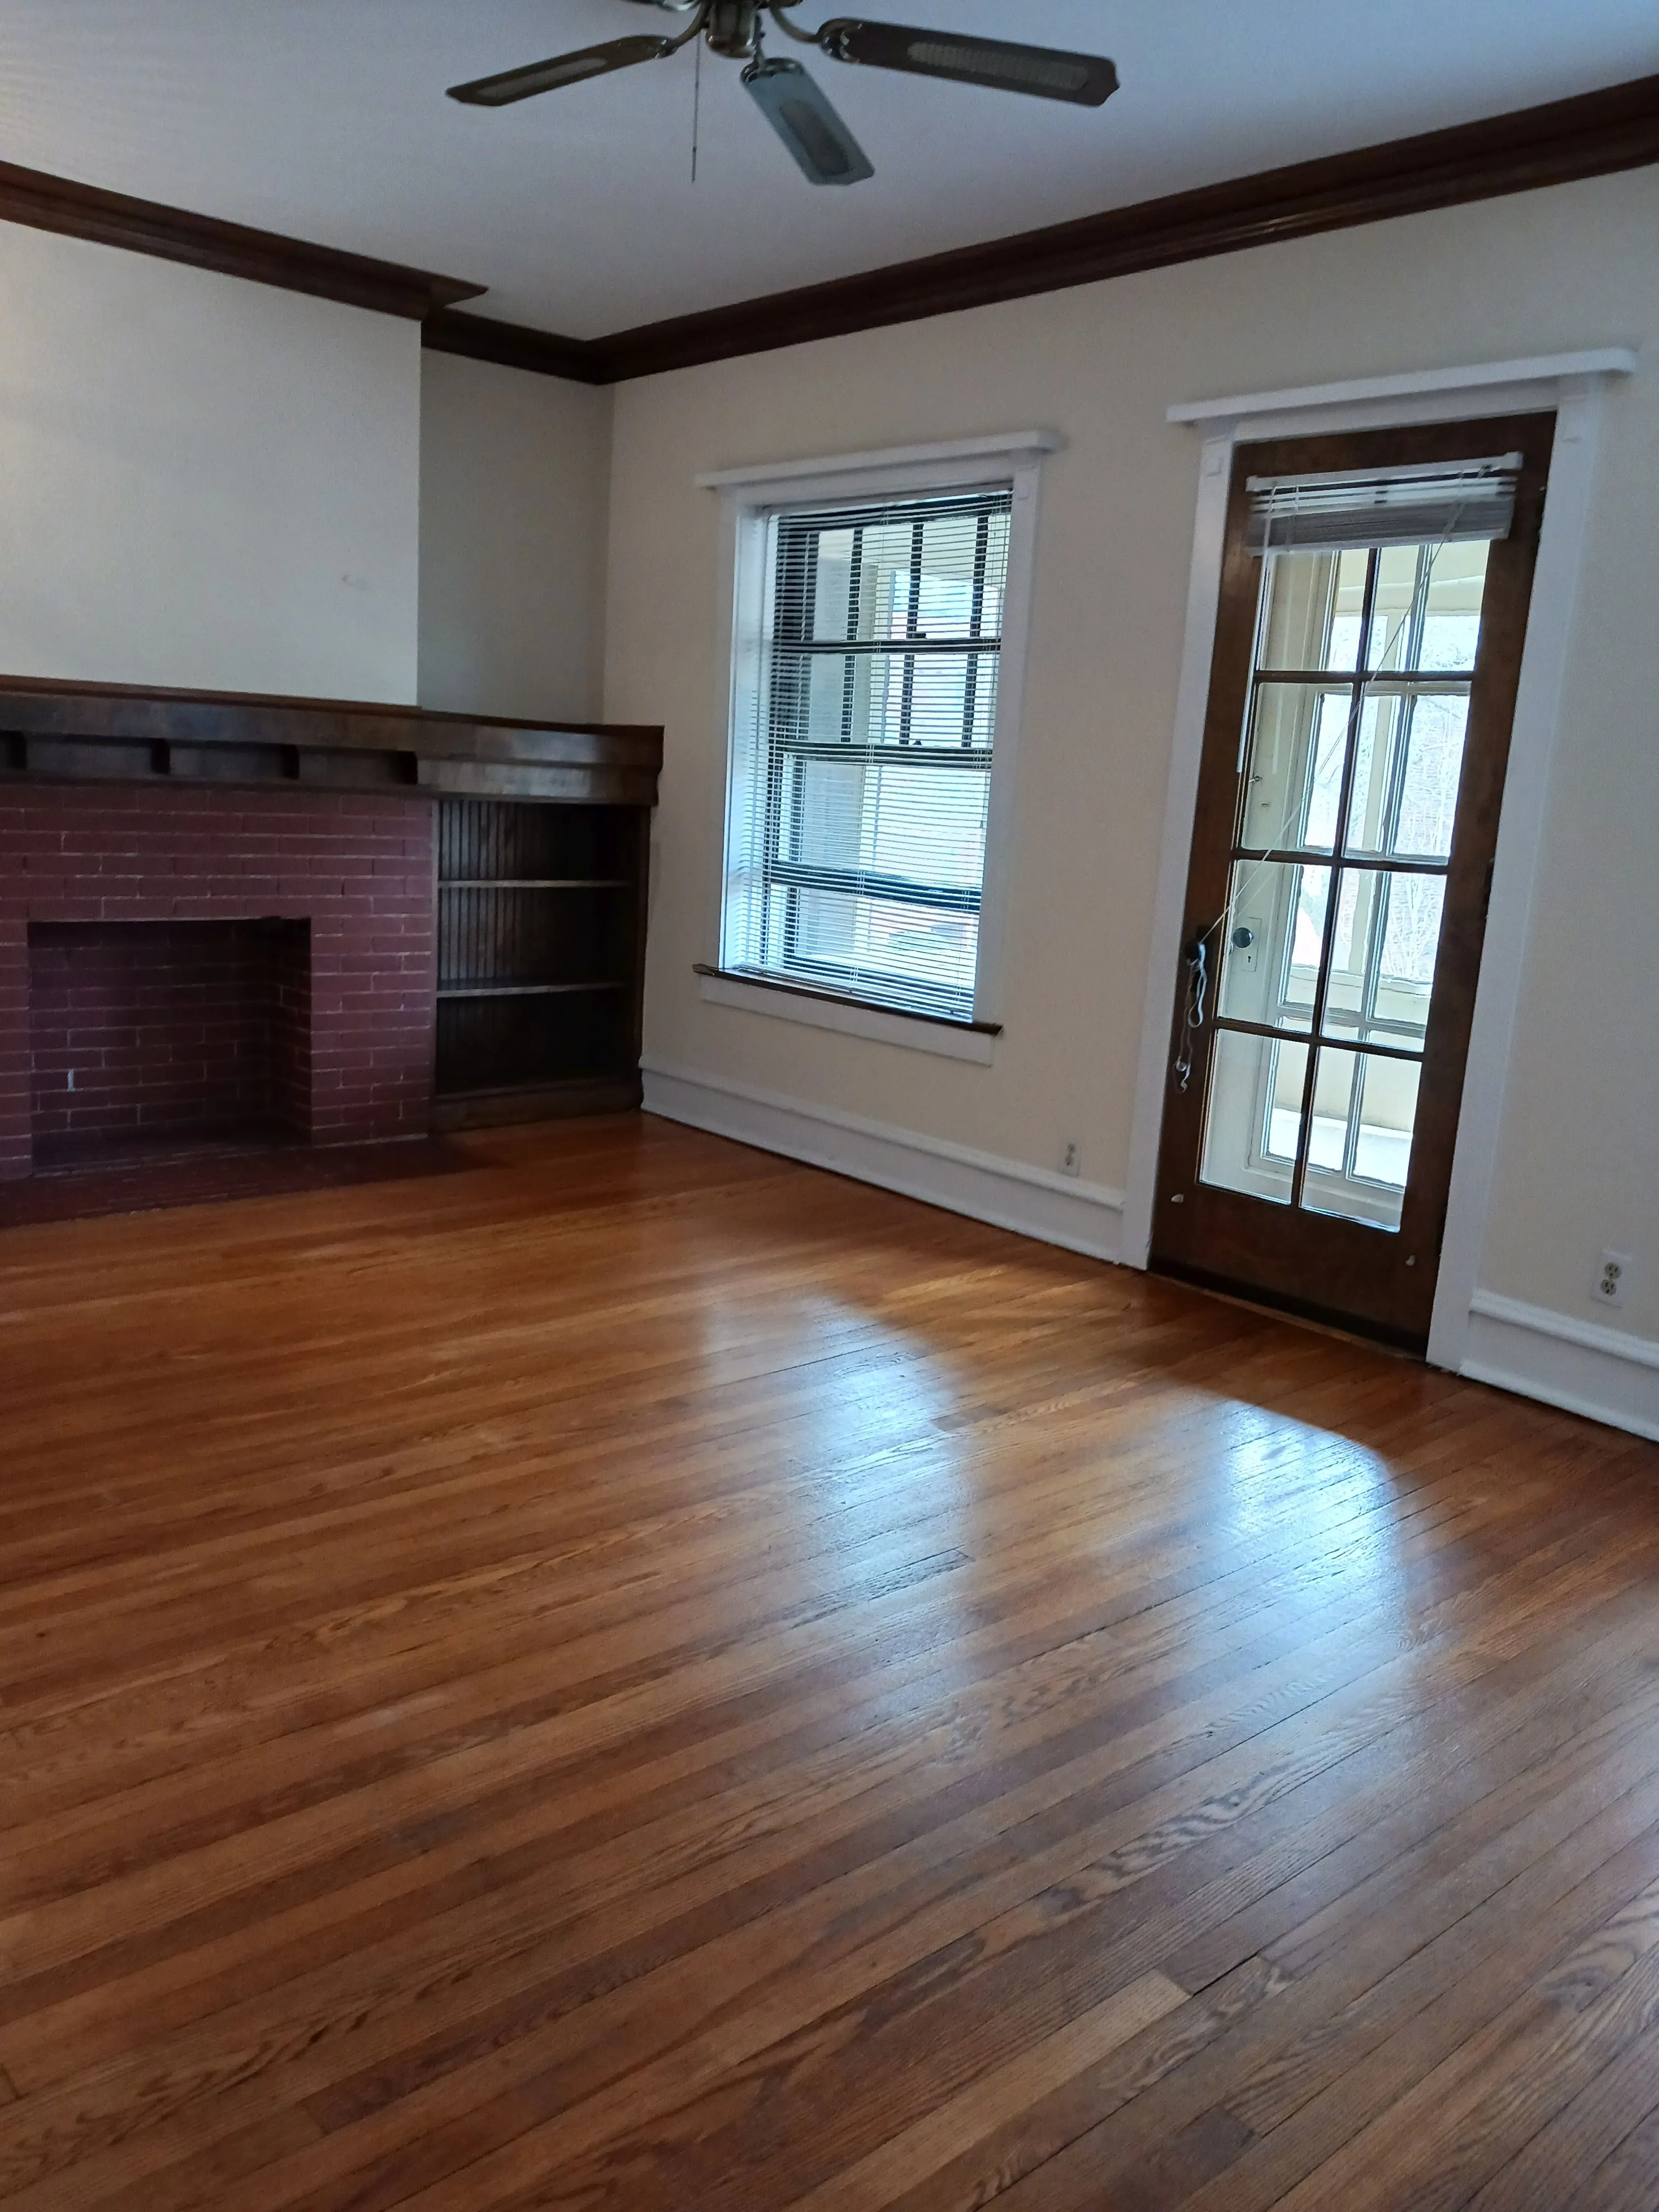 5757 N WINTHROP AVE 60660-Ardmore Winthrop-unit#2-Chicago-IL